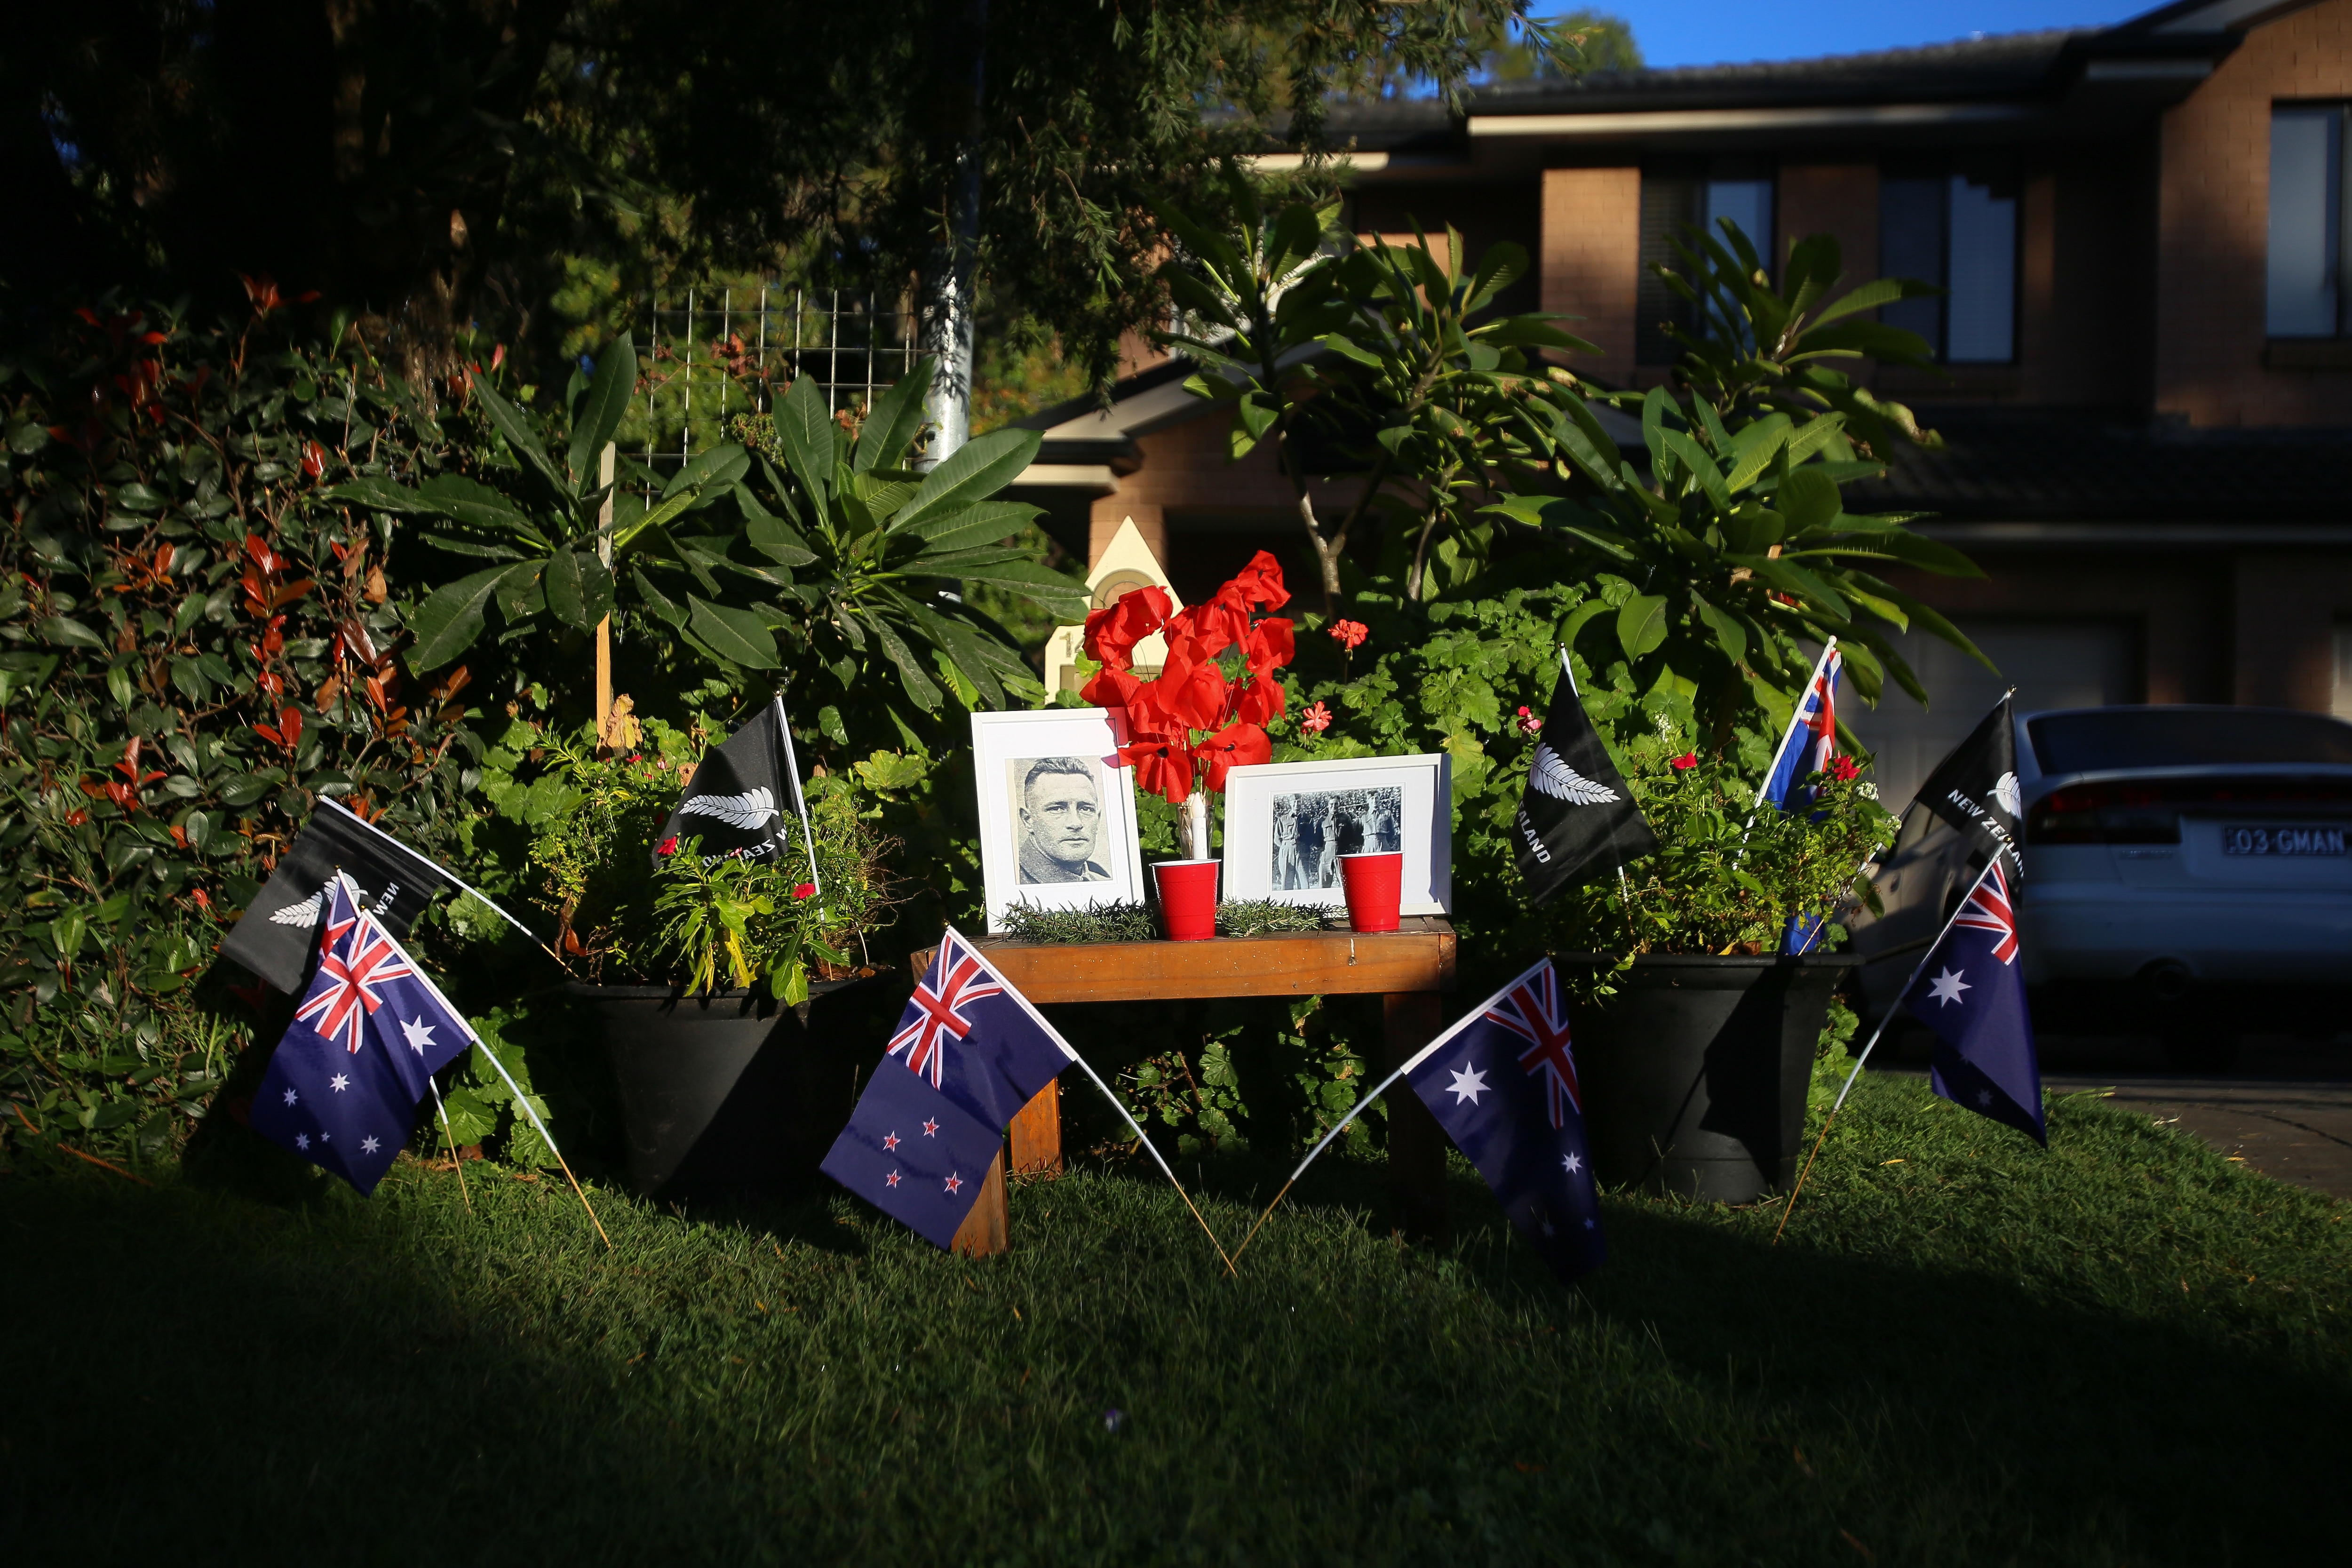 A memorial is seen on the front lawn of a Rydalmere resident in Sydney during the early hours of Anzac Day.